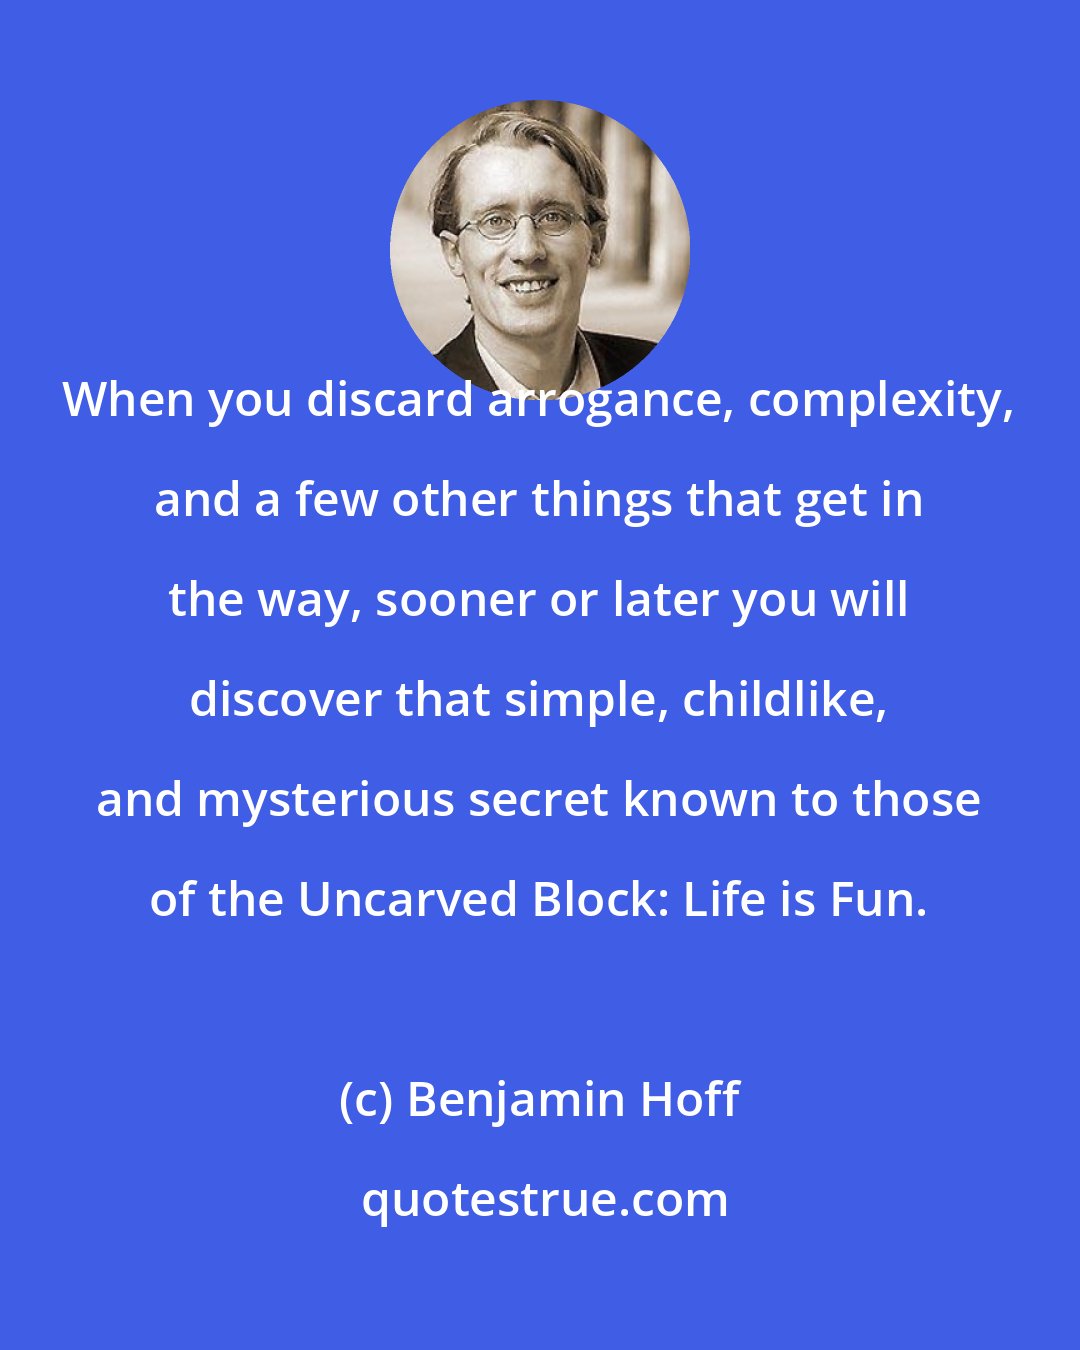 Benjamin Hoff: When you discard arrogance, complexity, and a few other things that get in the way, sooner or later you will discover that simple, childlike, and mysterious secret known to those of the Uncarved Block: Life is Fun.